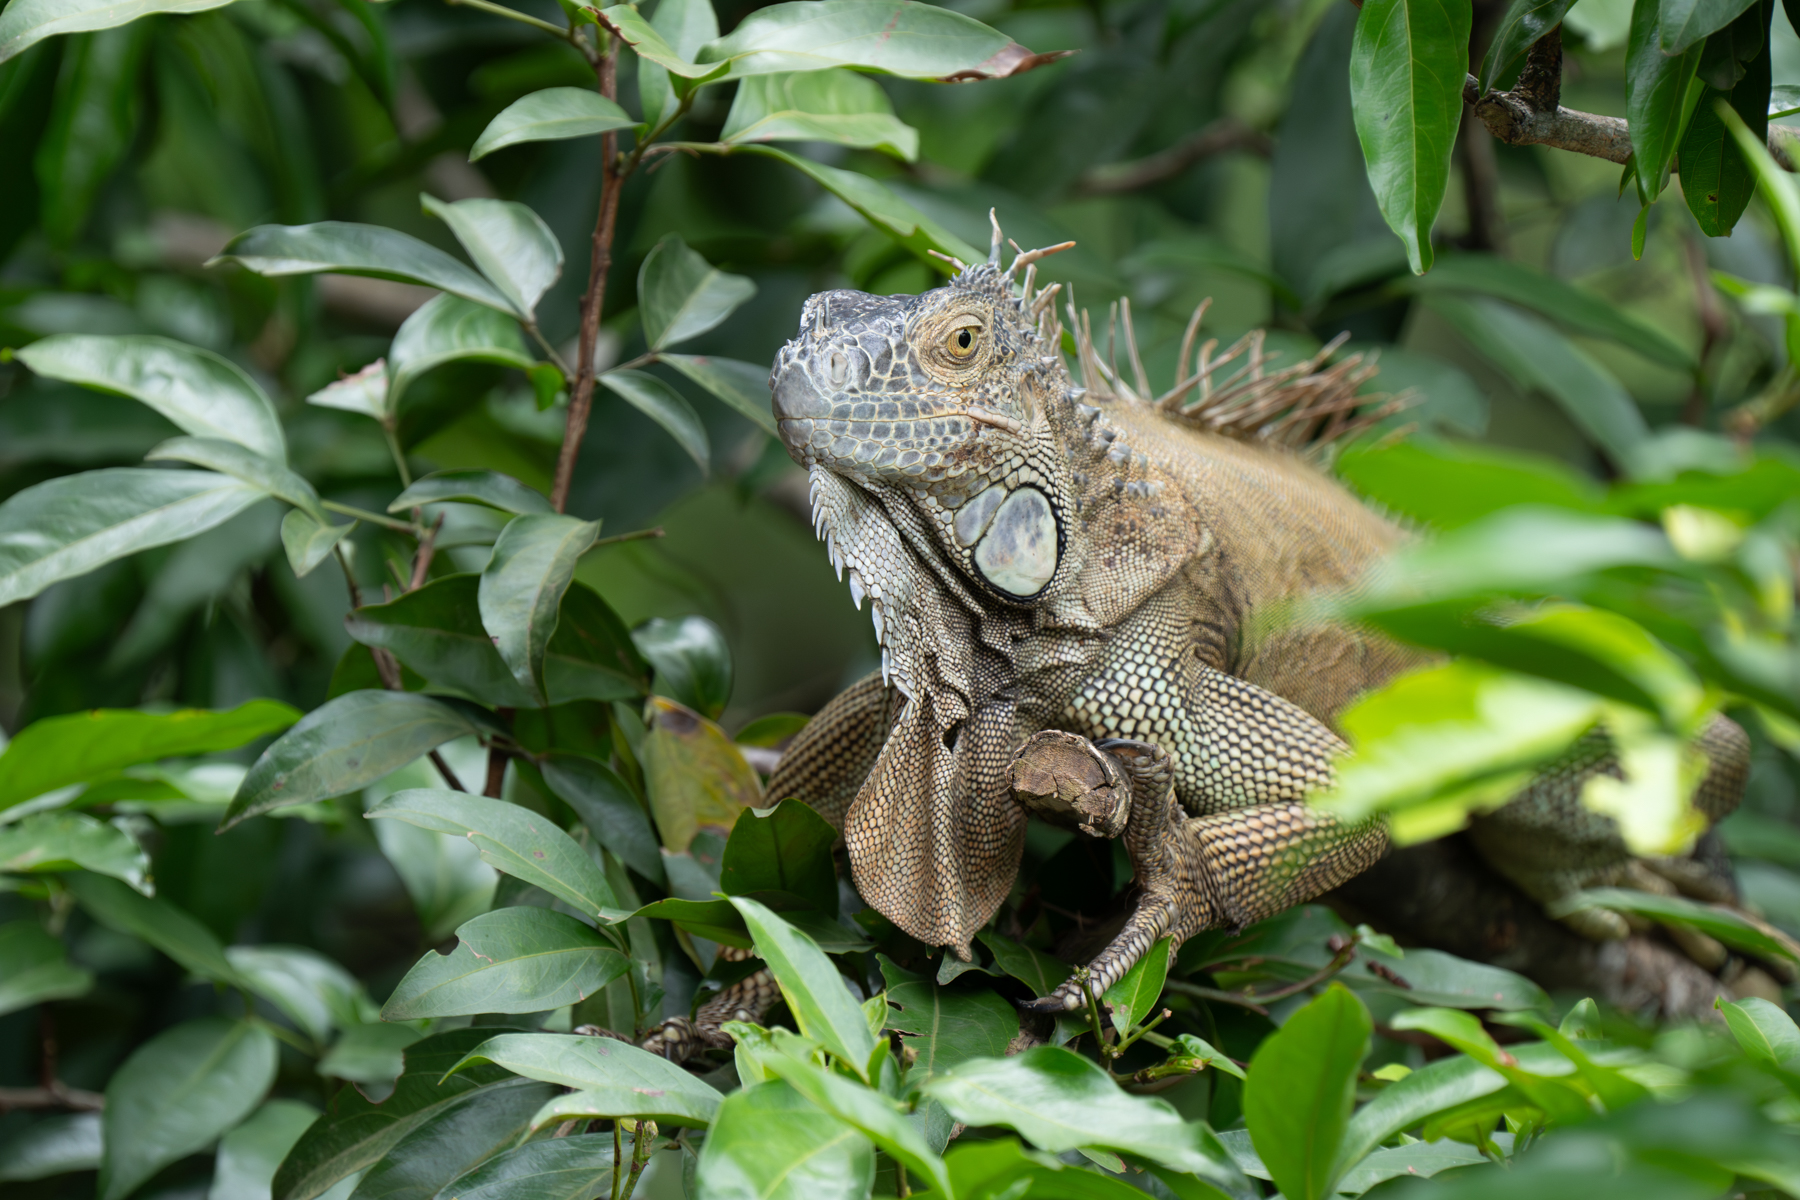 Green Iguanas might be proof that we still live amongst dinosaurs (image by Inger Vandyke)